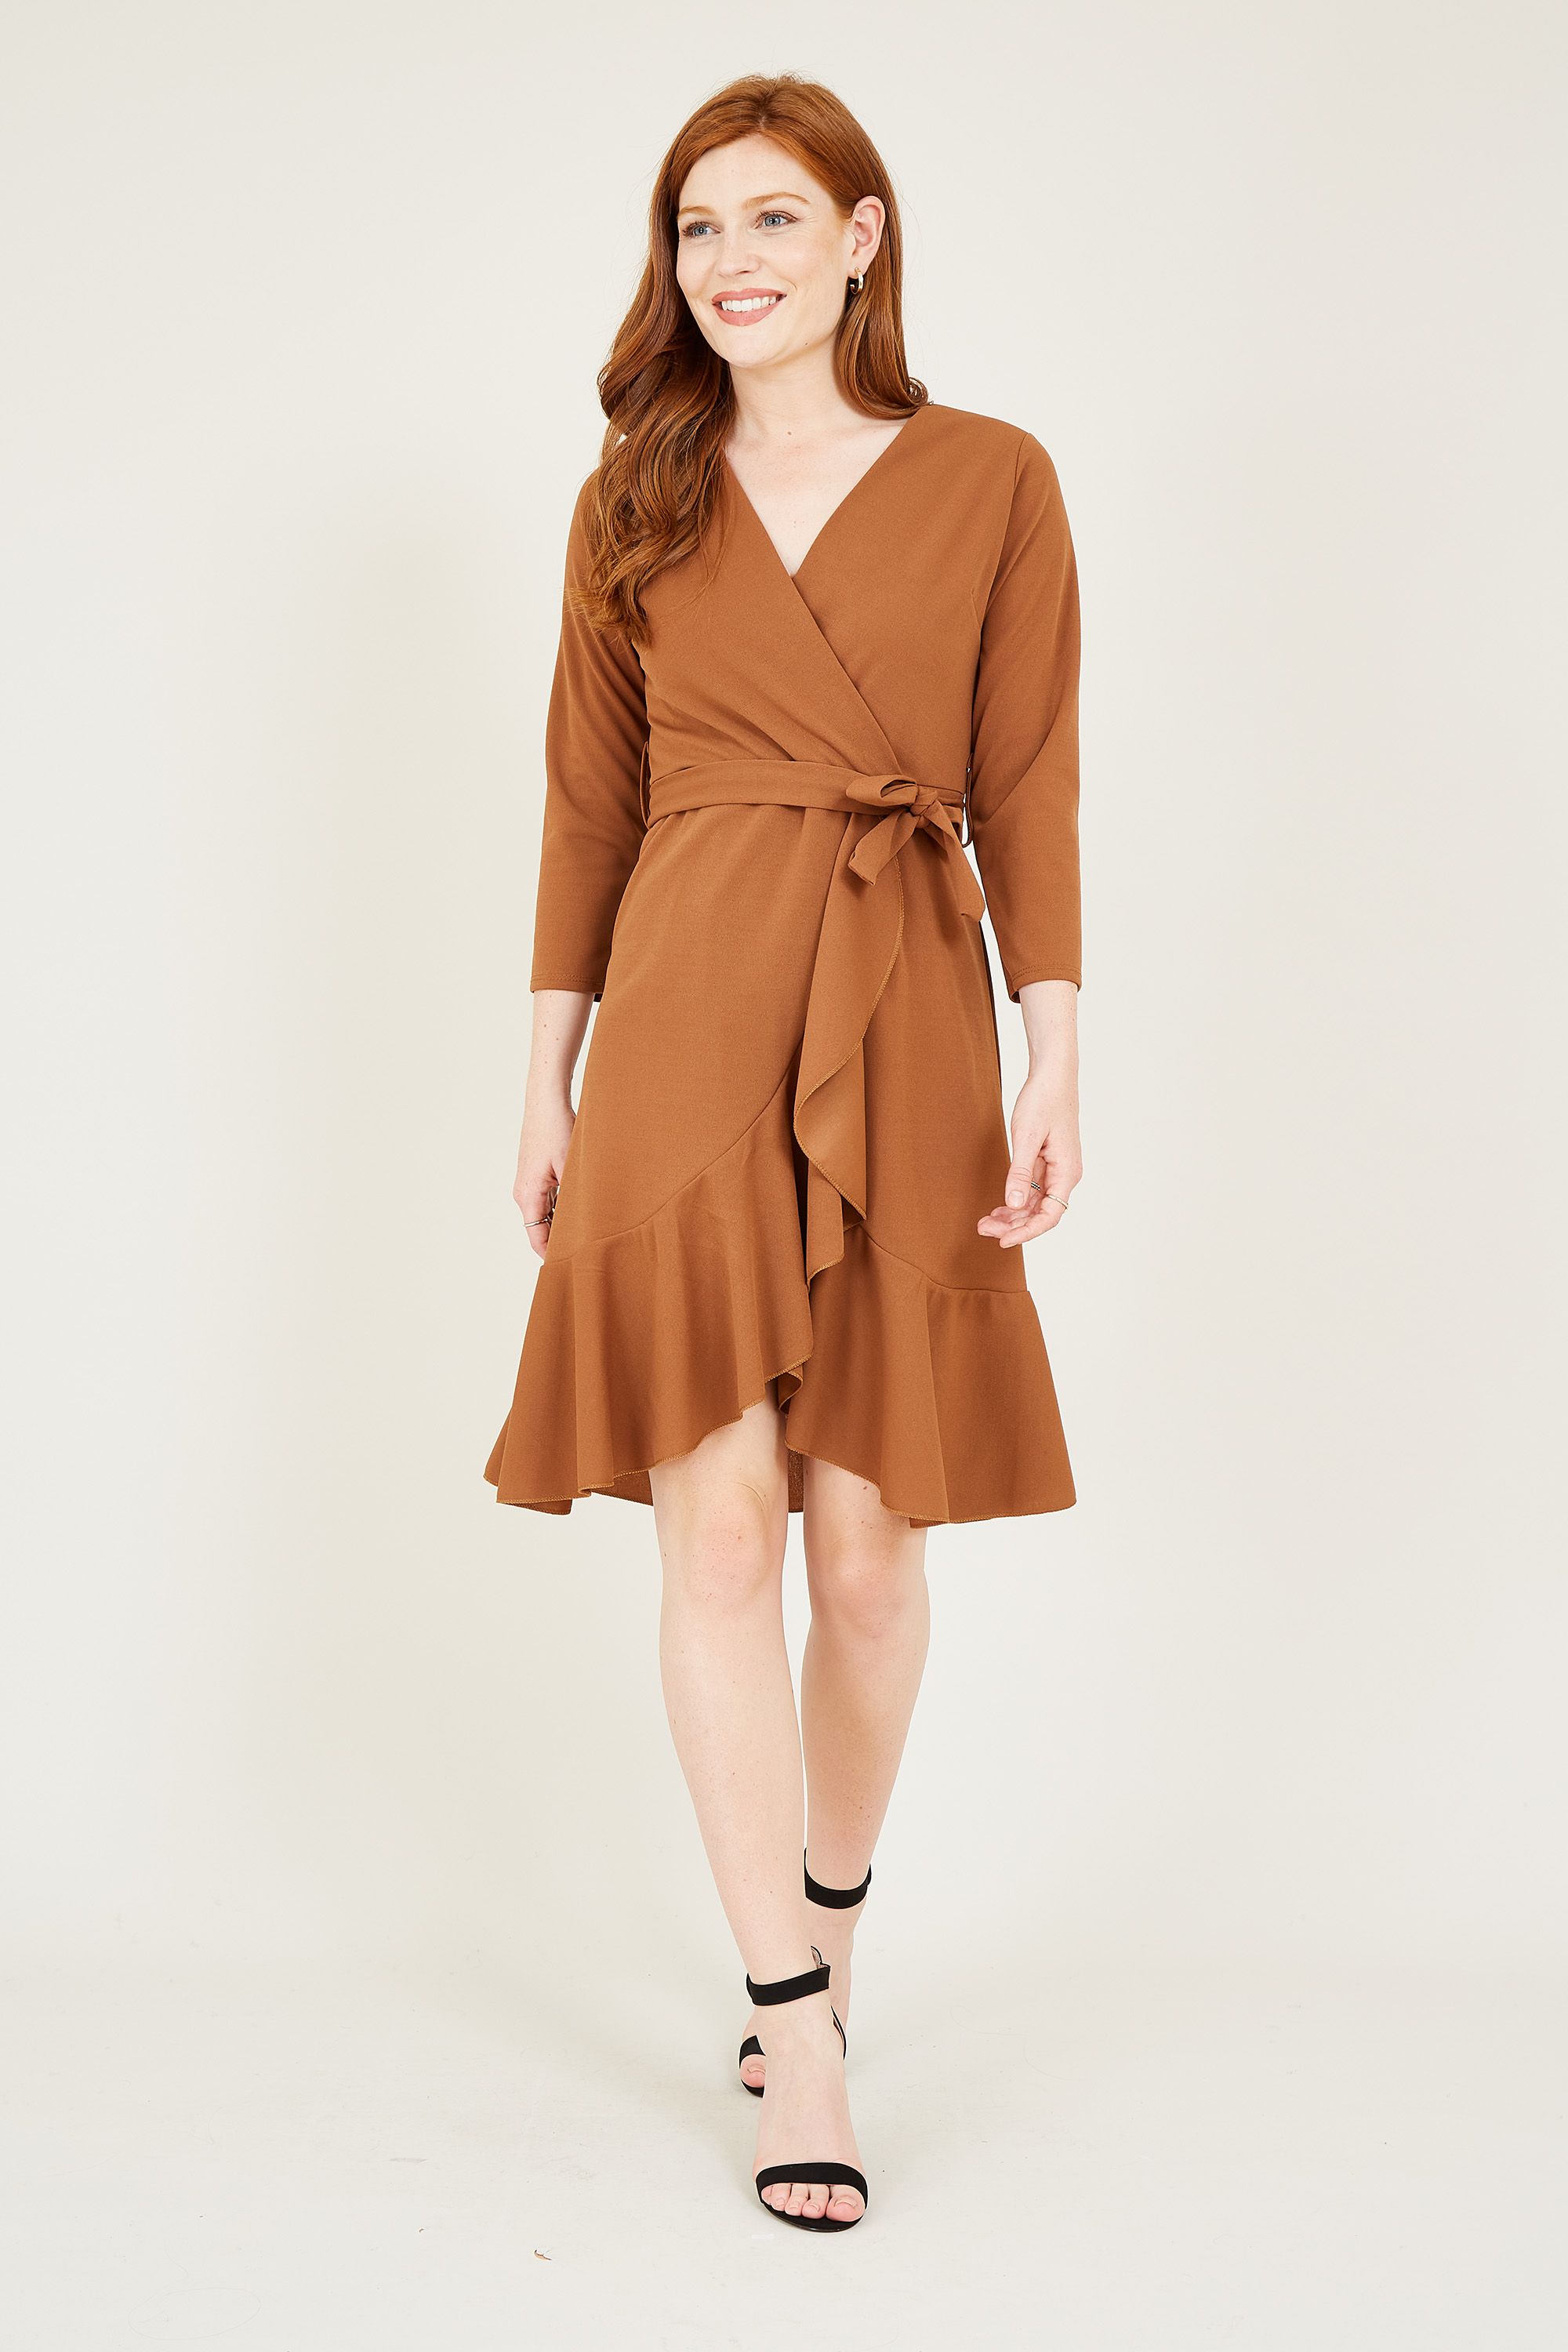 Easily dressed up or down, this Mela Tie Wrap Dress is a staple for the season. Framed by long sleeves and a flippy hemline, it's enhanced by a figure-loving self-tie waist. The soft-touch fabric makes it a comfortable choice, whilst the earthy palette allows you to wear it to any occasion. Accessorize with anything from boots to trainers.